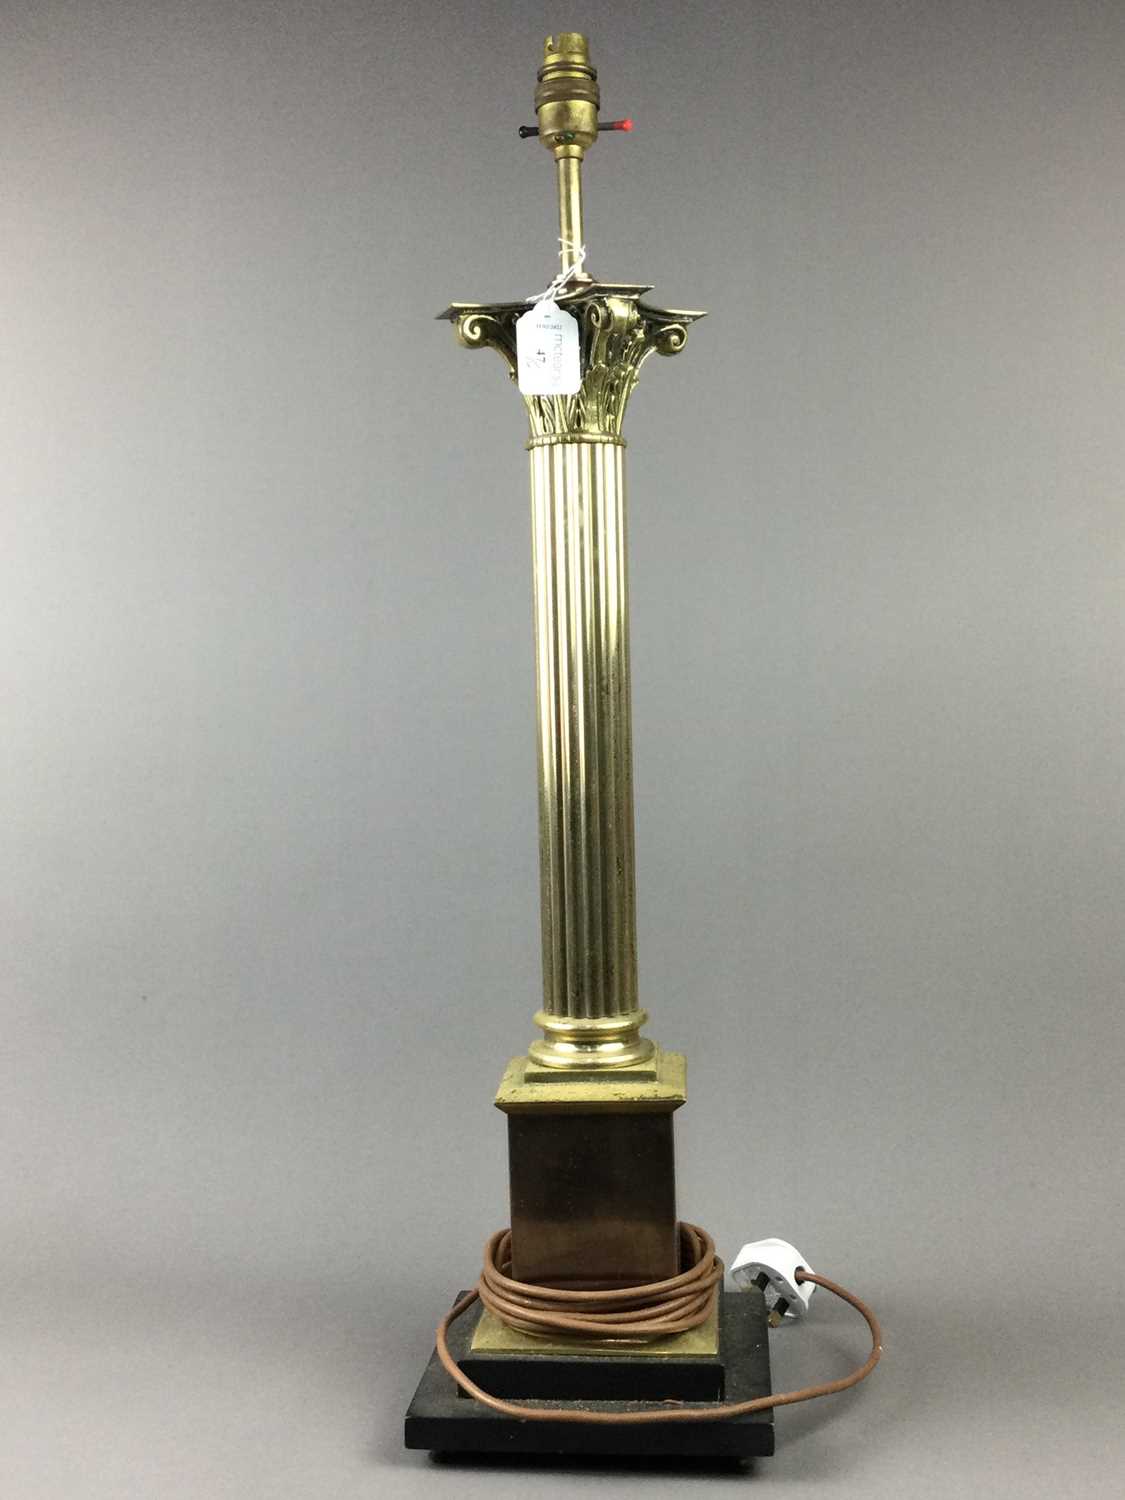 Lot 47 - A BRASS CORINTHIAN COLUMN TABLE LAMP, TWO OTHER LAMPS AND A MINIATURE TELEPHONE BOX